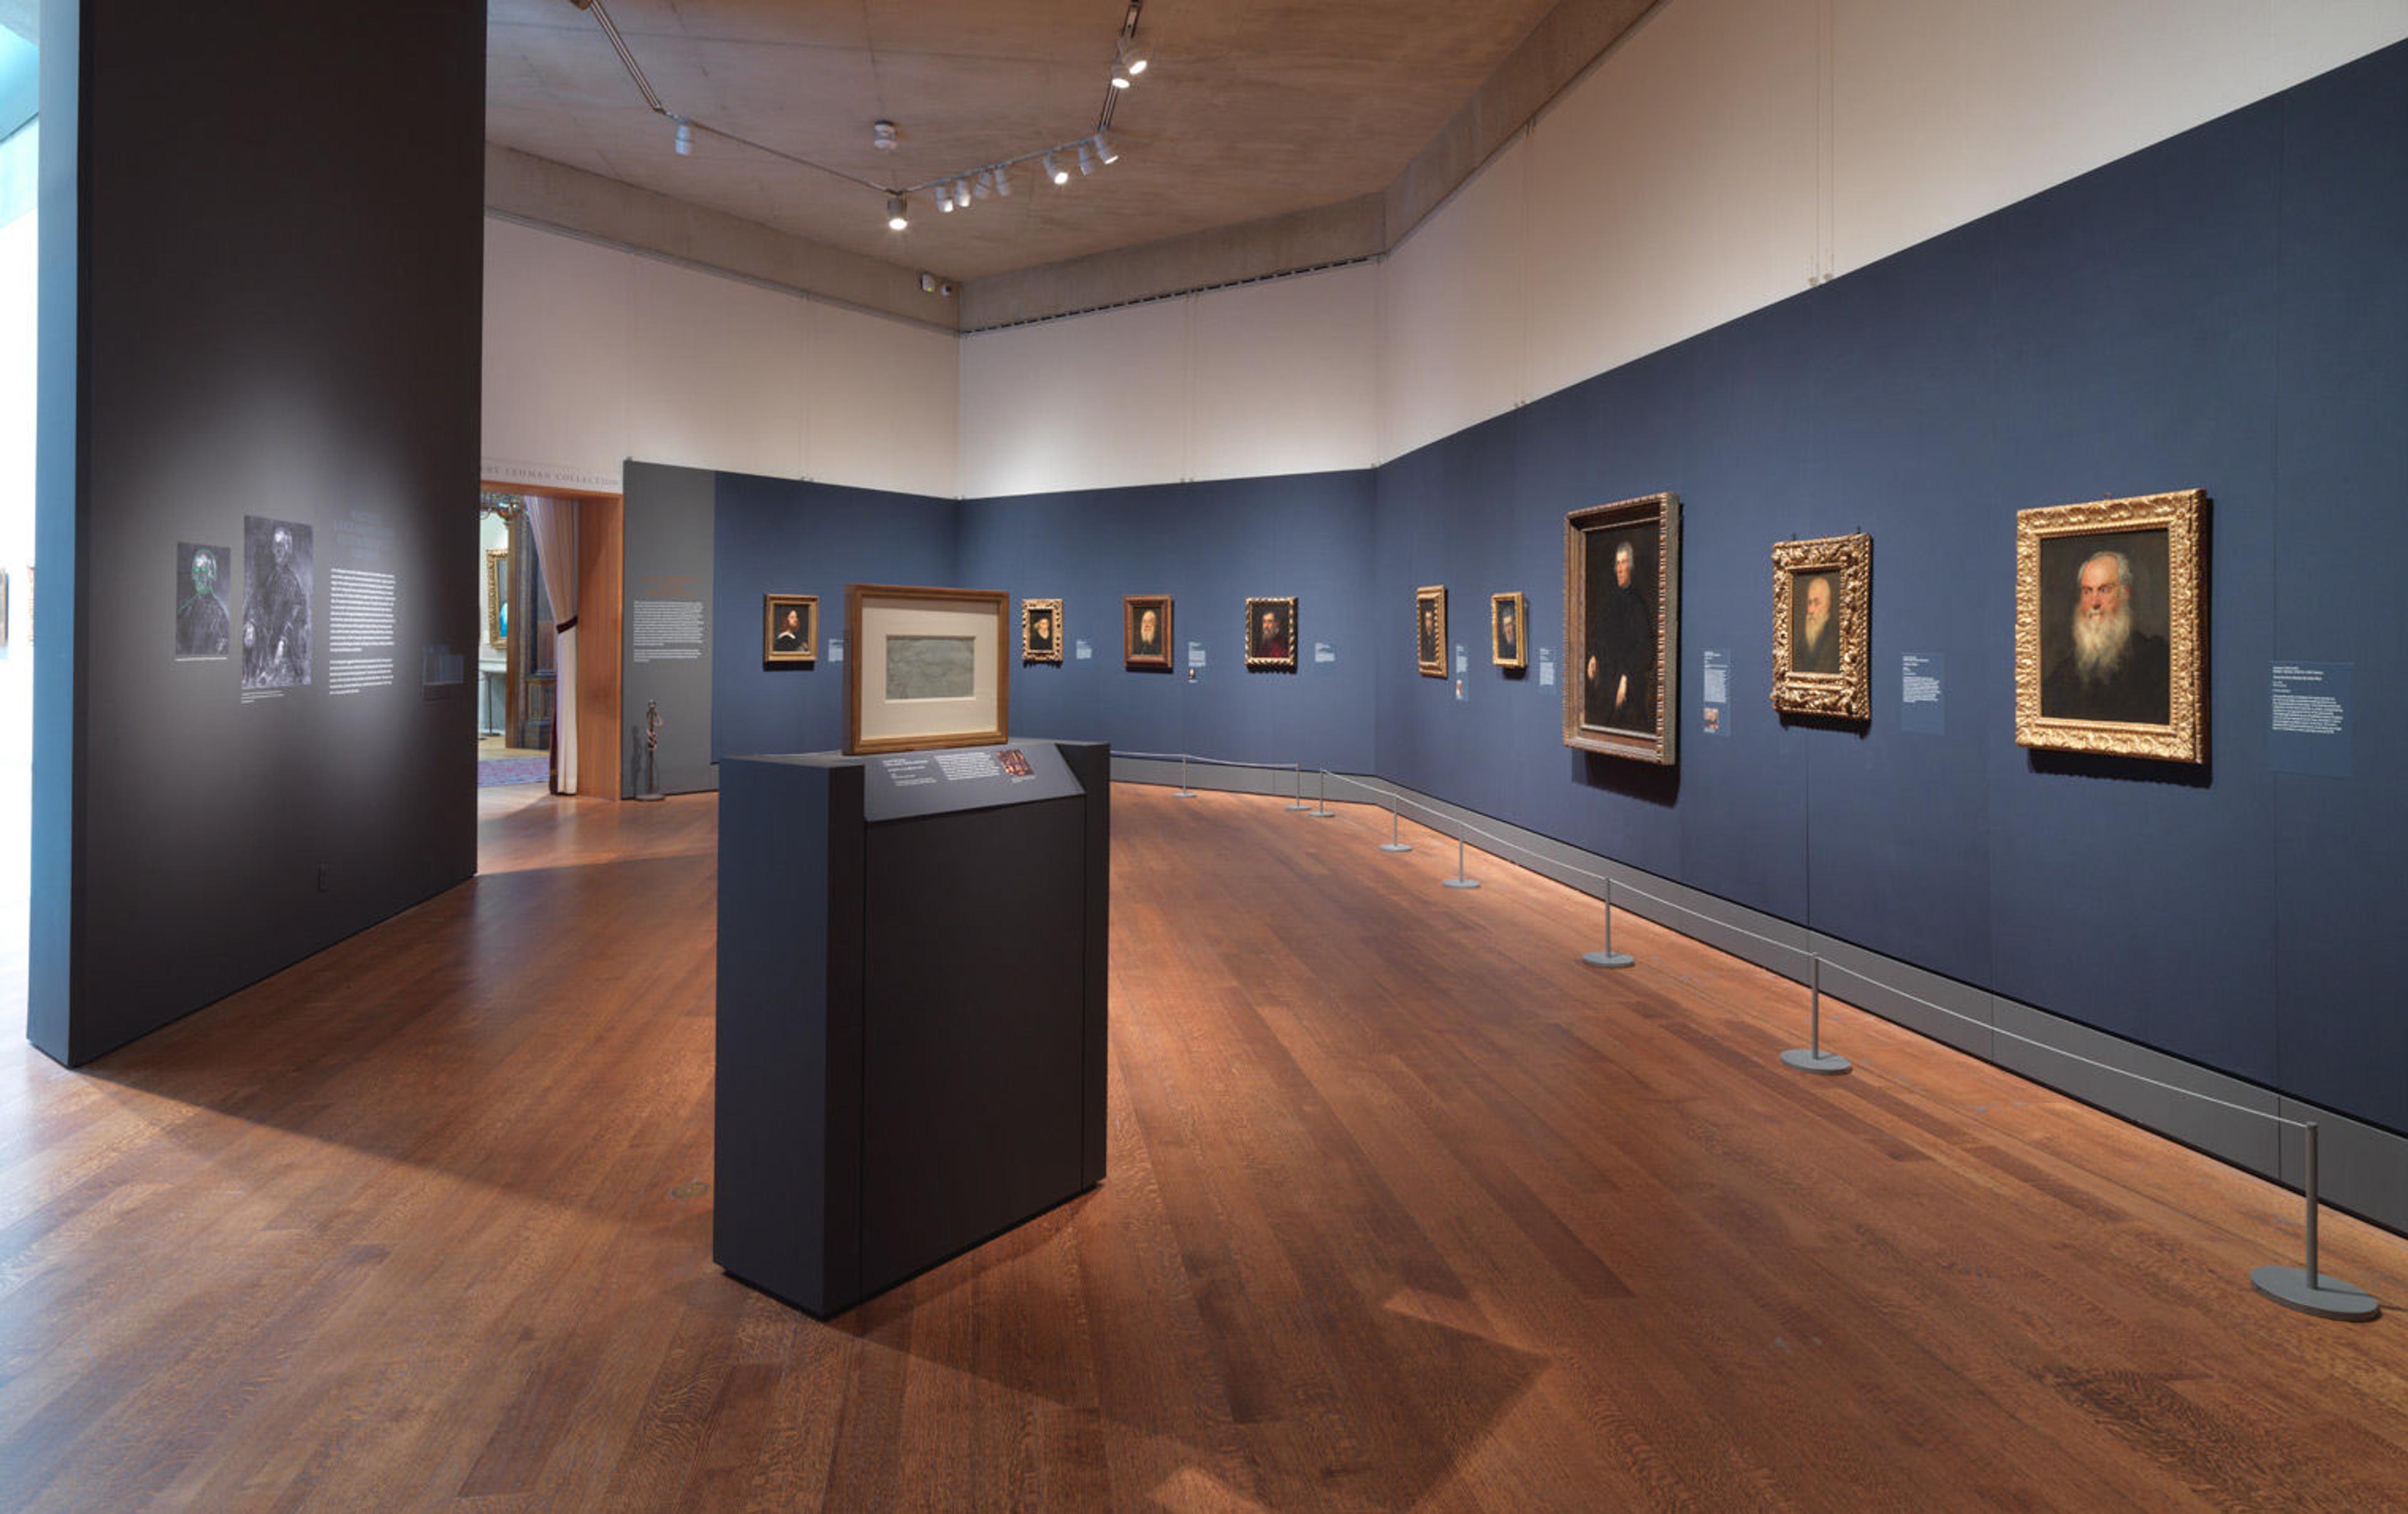 View of a gallery of Jacopo and Domenico Tintoretto's work